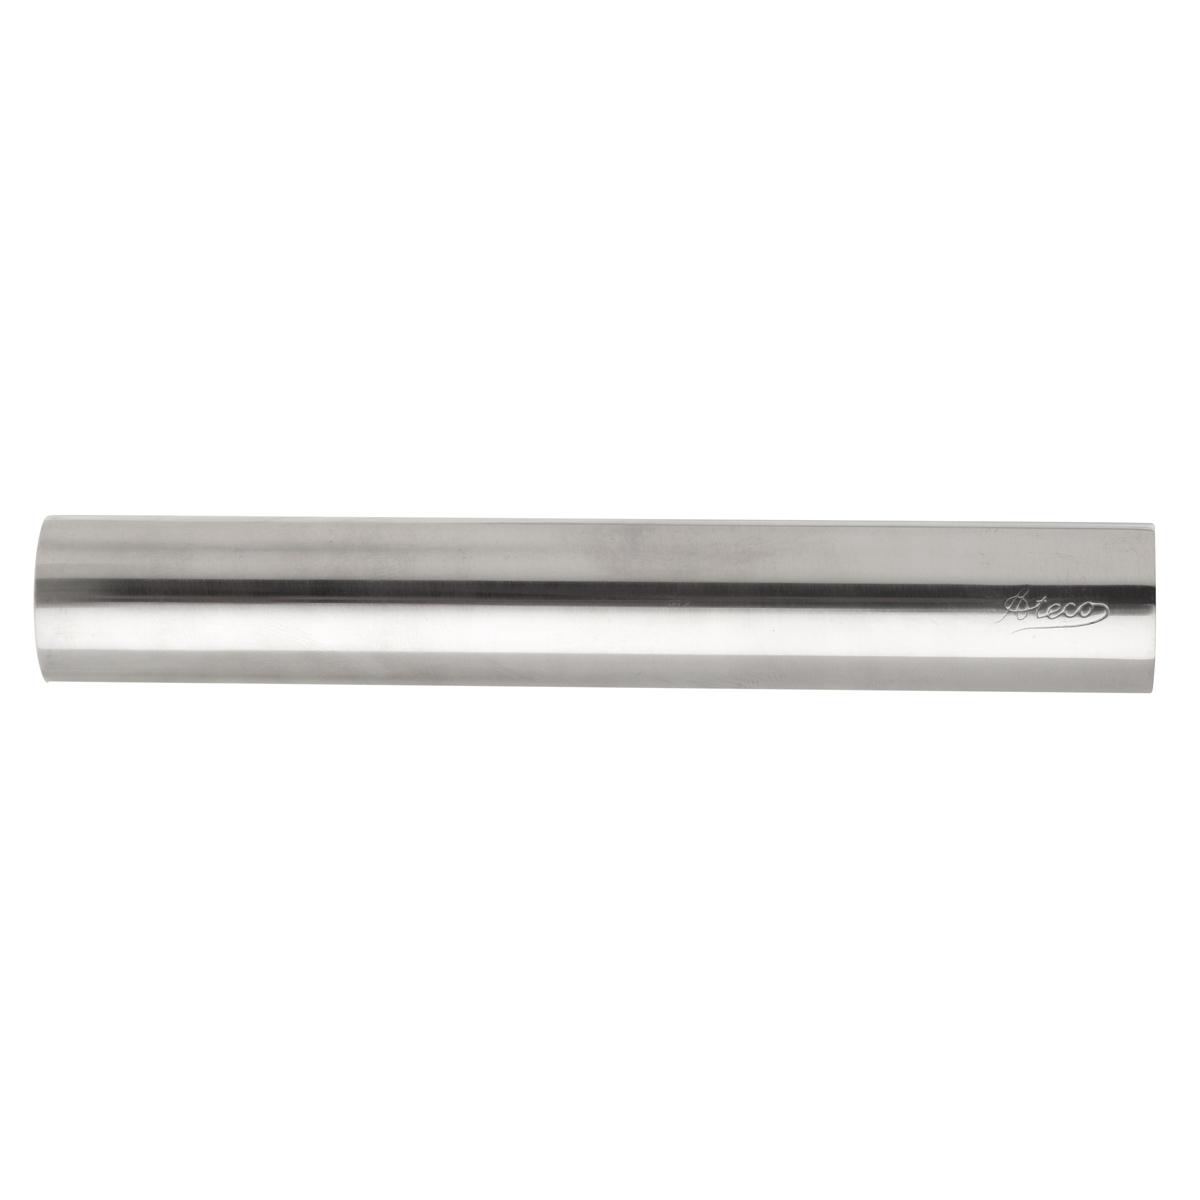 Ateco Stainless Steel Cannoli Form, 5-5/8" L x 7/8" Dia.